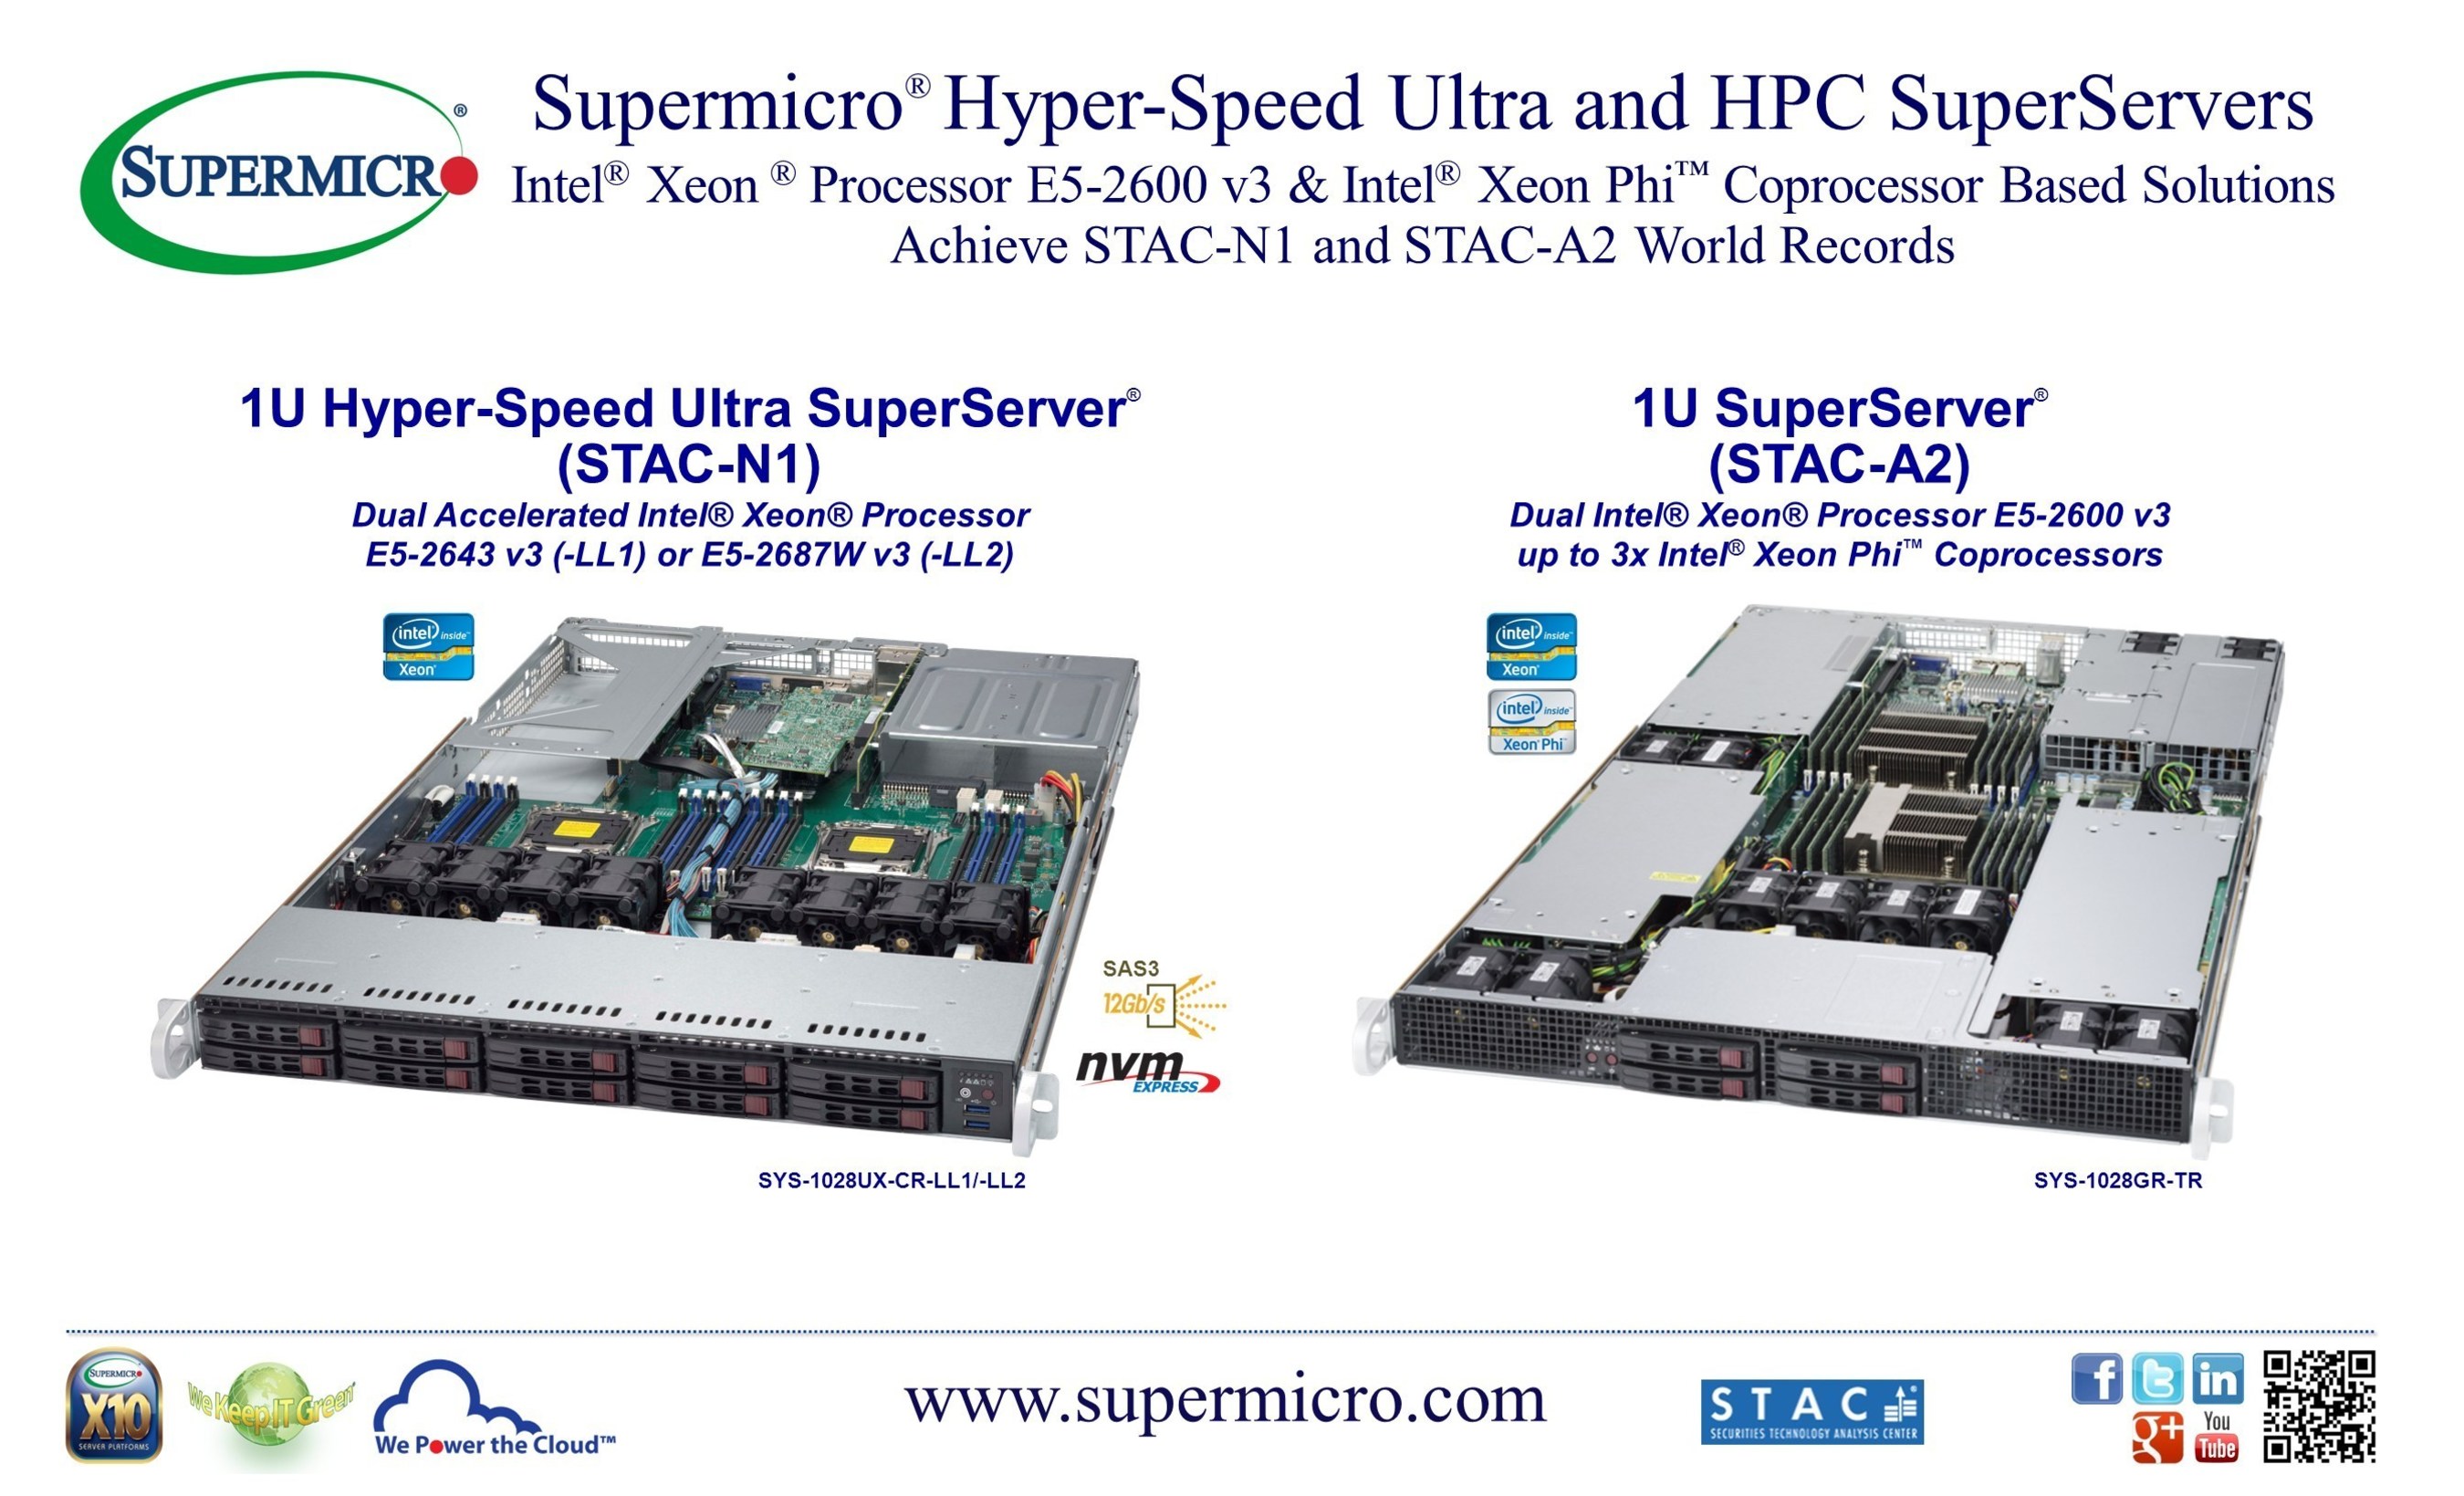 Supermicro(R) Servers Achieve World Record STAC N1/A2 Benchmark Results